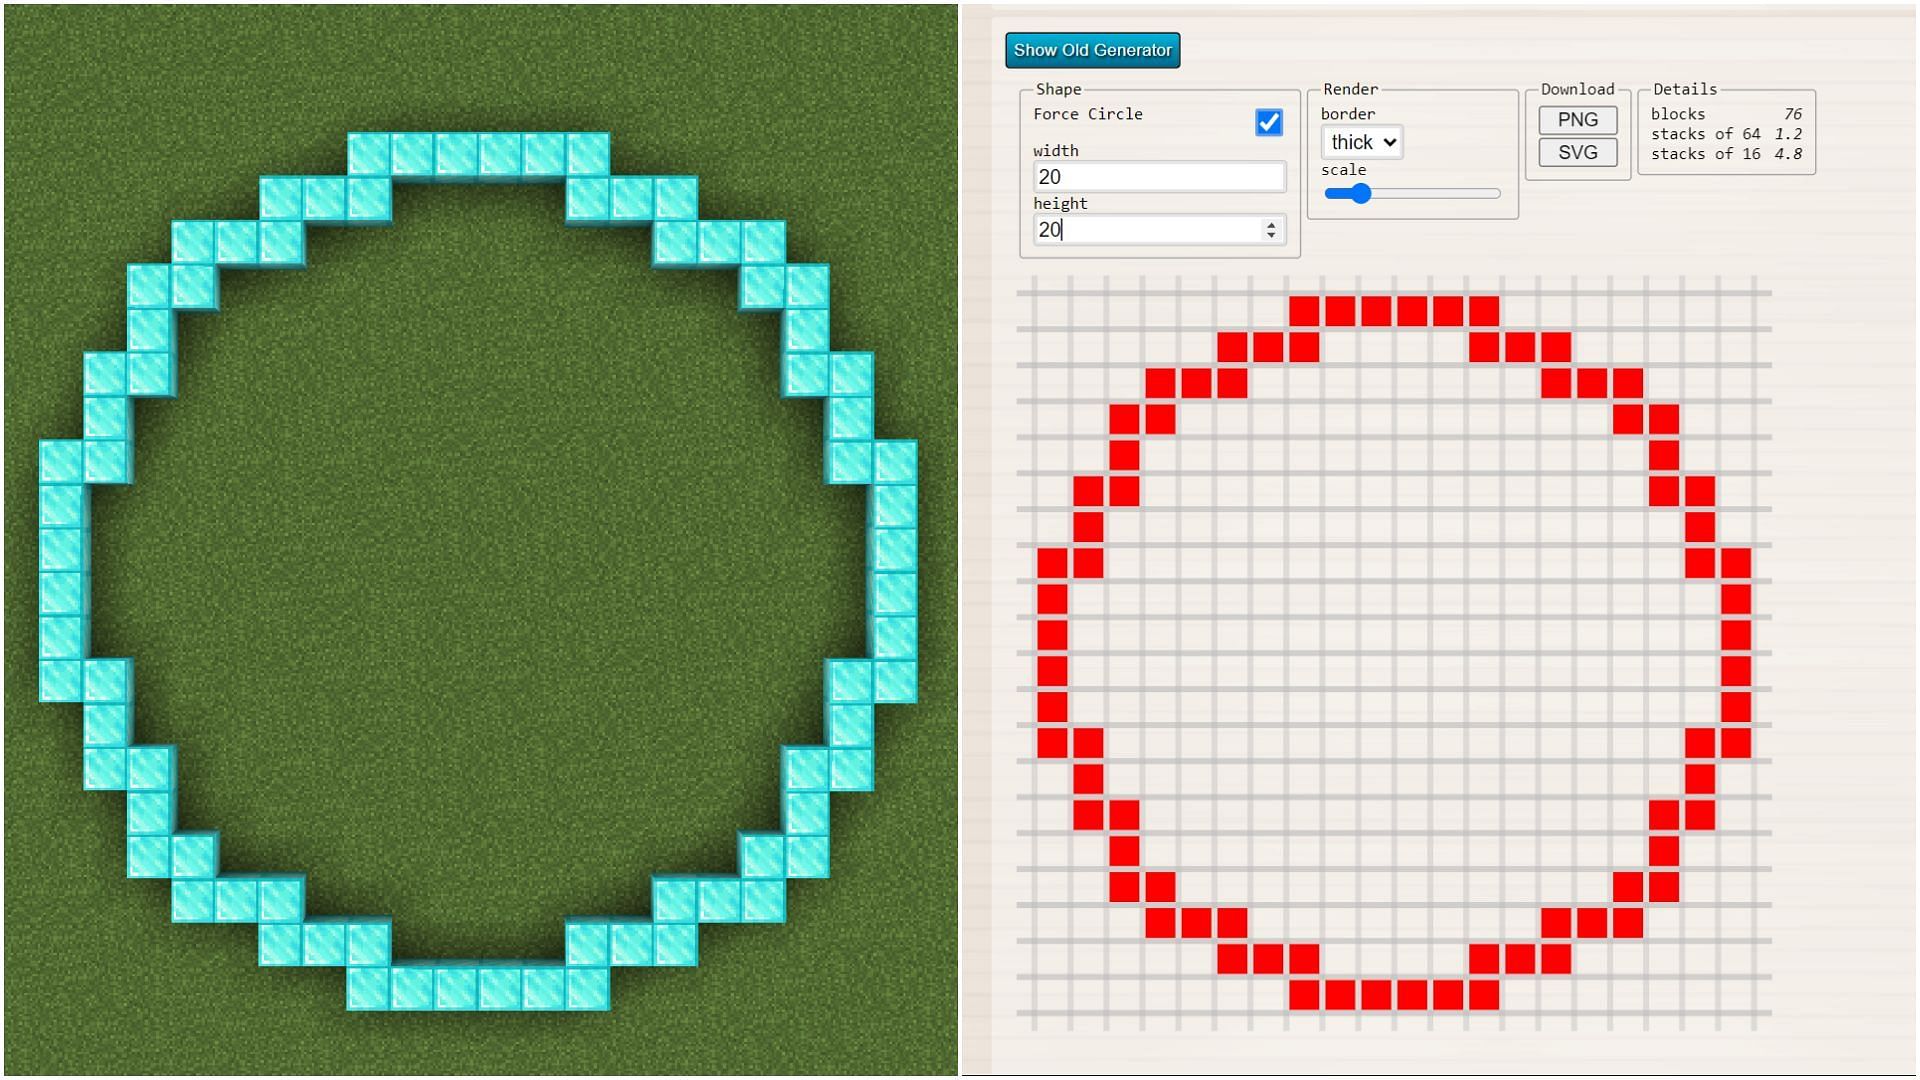 Creating circular structures in Minecraft is extremely easy with circle generators (Image via Sportskeeda)